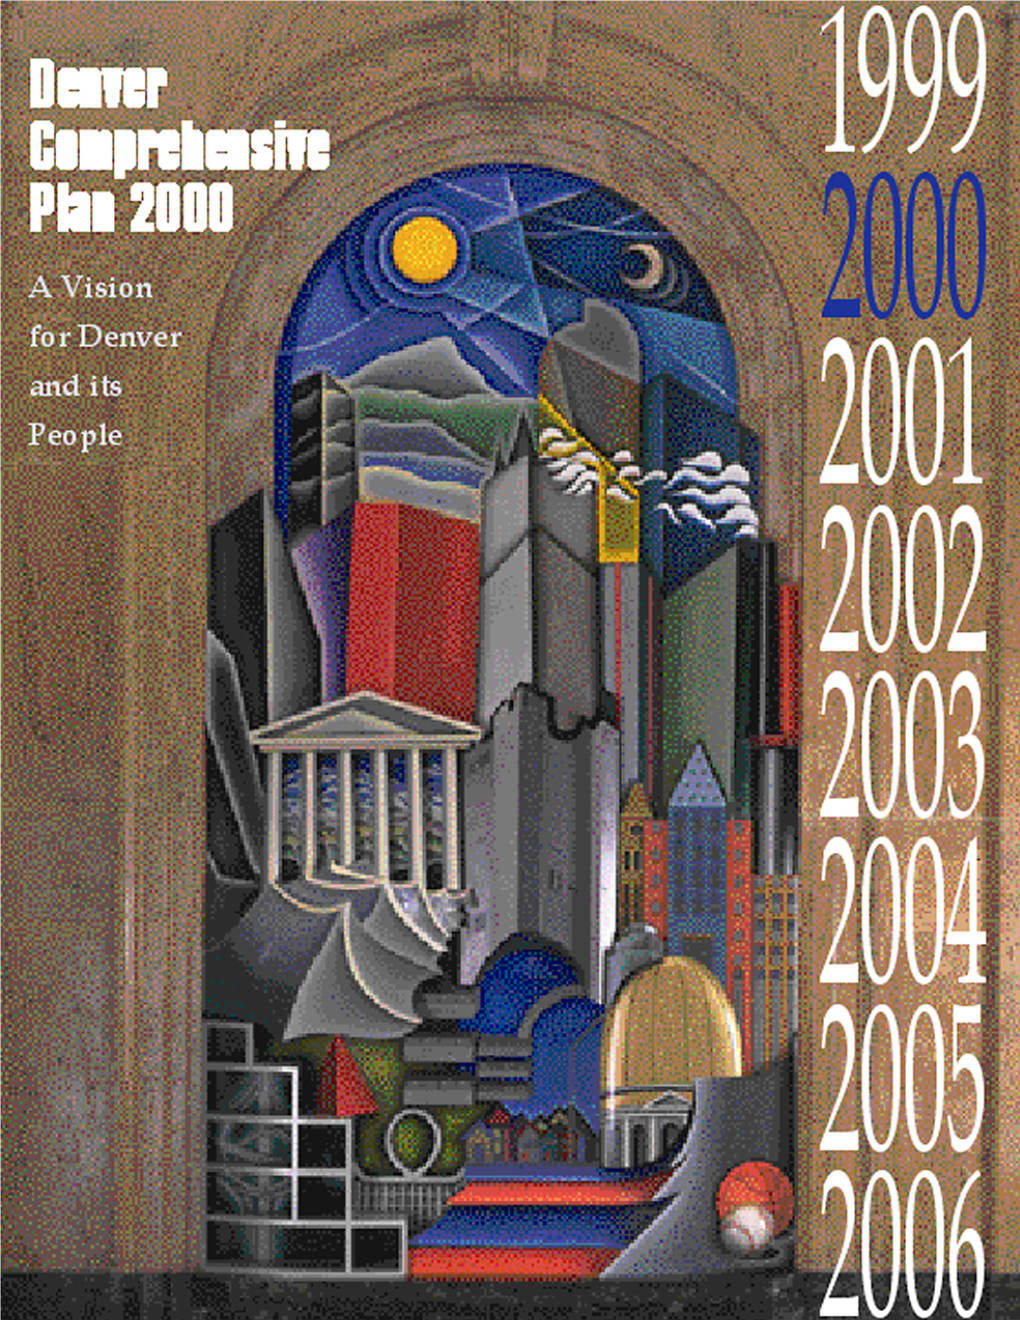 Table of Contents to Denver Comprehensive Plan 2000